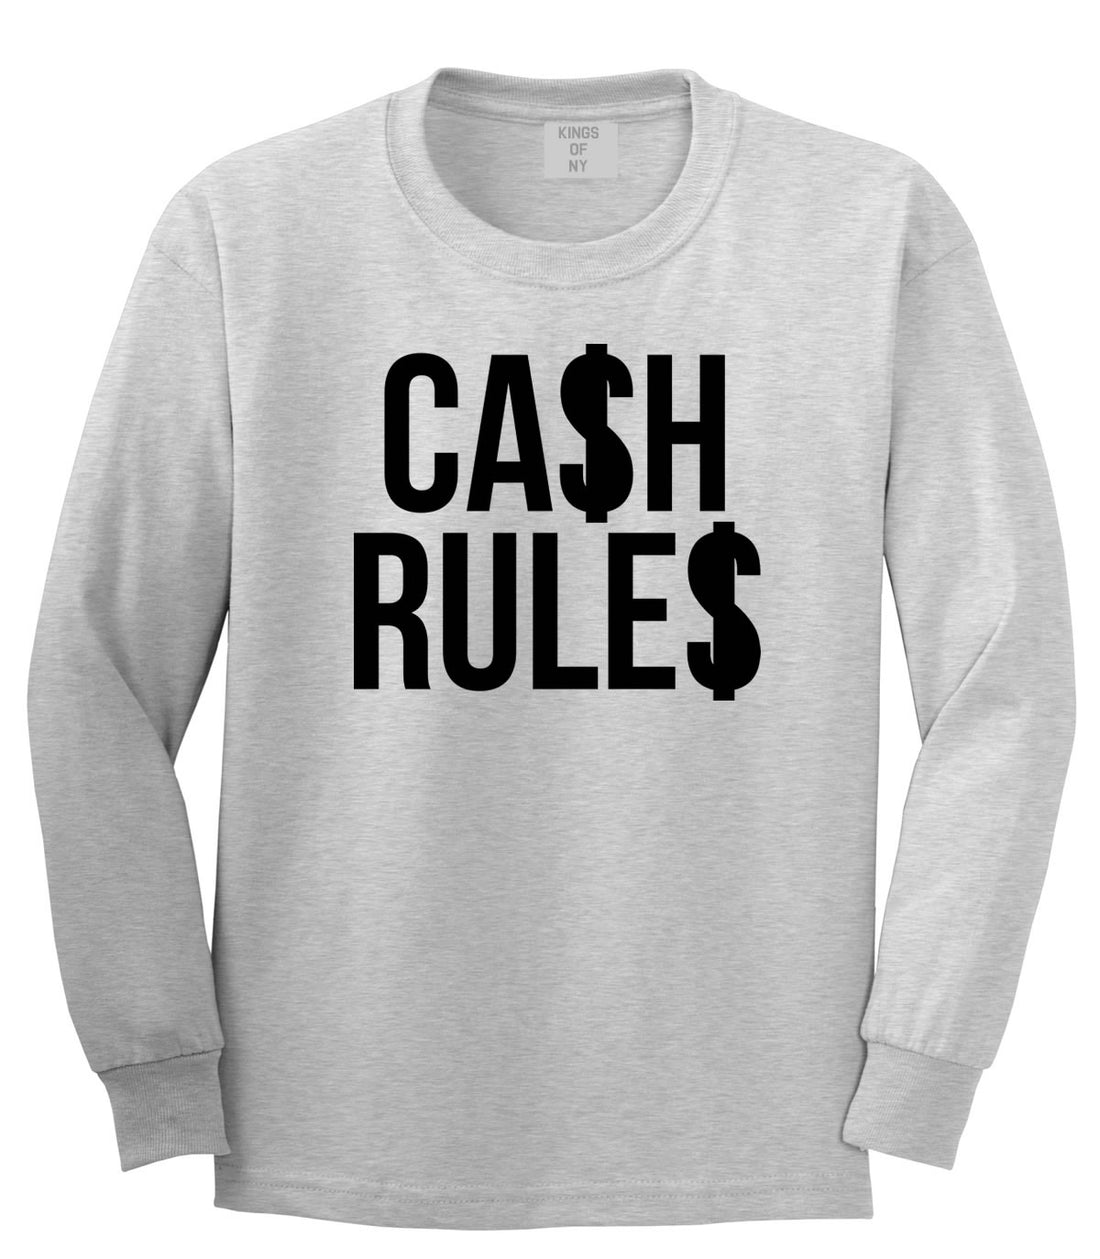 Cash Rules Long Sleeve T-Shirt in Grey by Kings Of NY